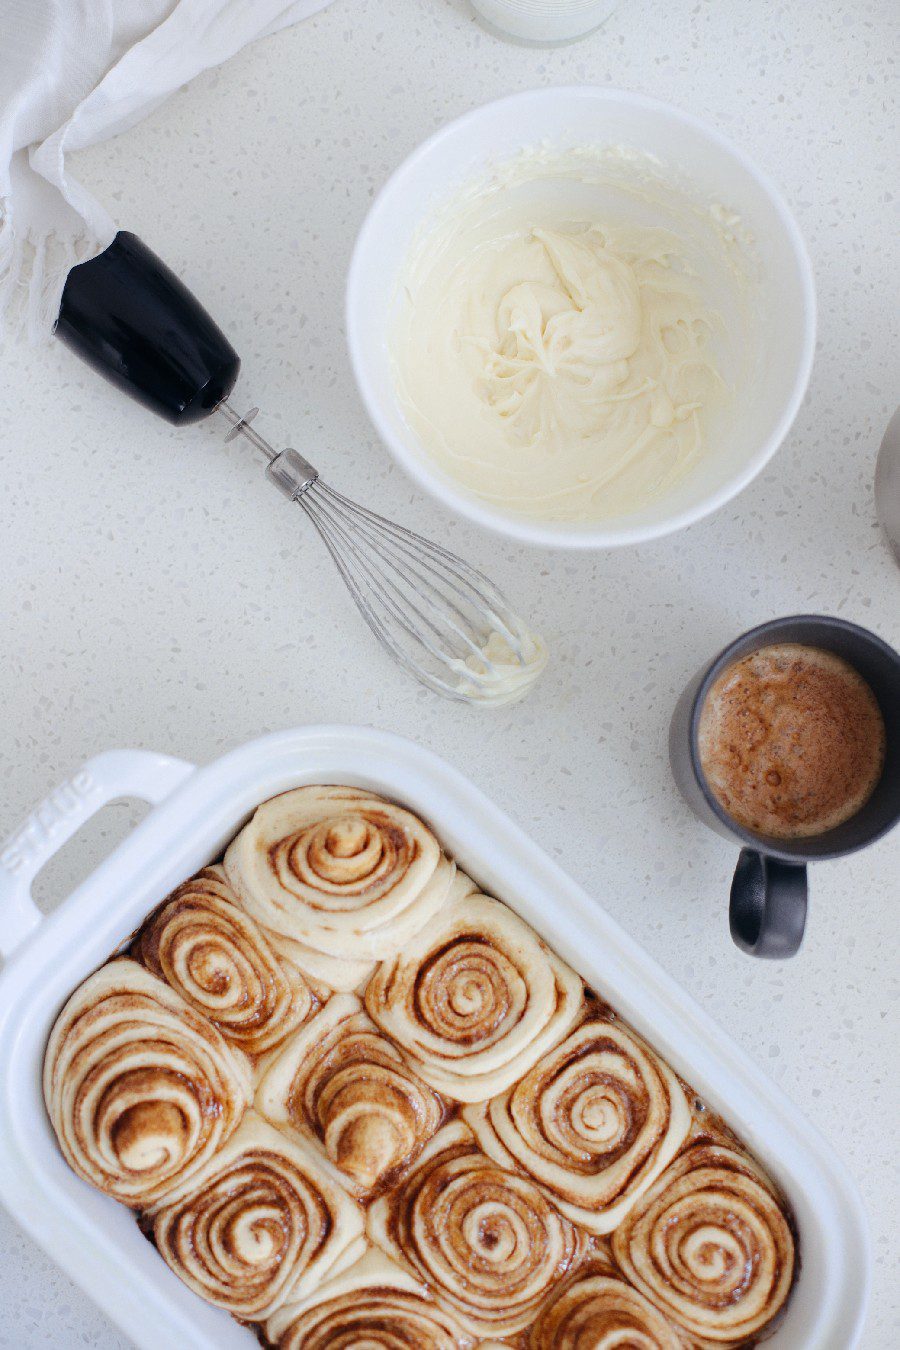 Easy bread machine cinnamon rolls dough. The best gooey sticky buns and clone of a Cinnabon roll icing! NO waiting overnight. Click for the recipe and how to video for fluffy cinnamon rolls homemade with a bread maker machine! Use all purpose flour or make them gluten free. Recipe from top Florida lifestyle blogger Tabitha Blue of Fresh Mommy Blog. | Bread Machine Cinnamon Roll Recipe by popular Florida lifestyle blog, Fresh Mommy Blog: image of cinnamon rolls in a white ceramic baking dish next to a bowl of cream cheese icing. 